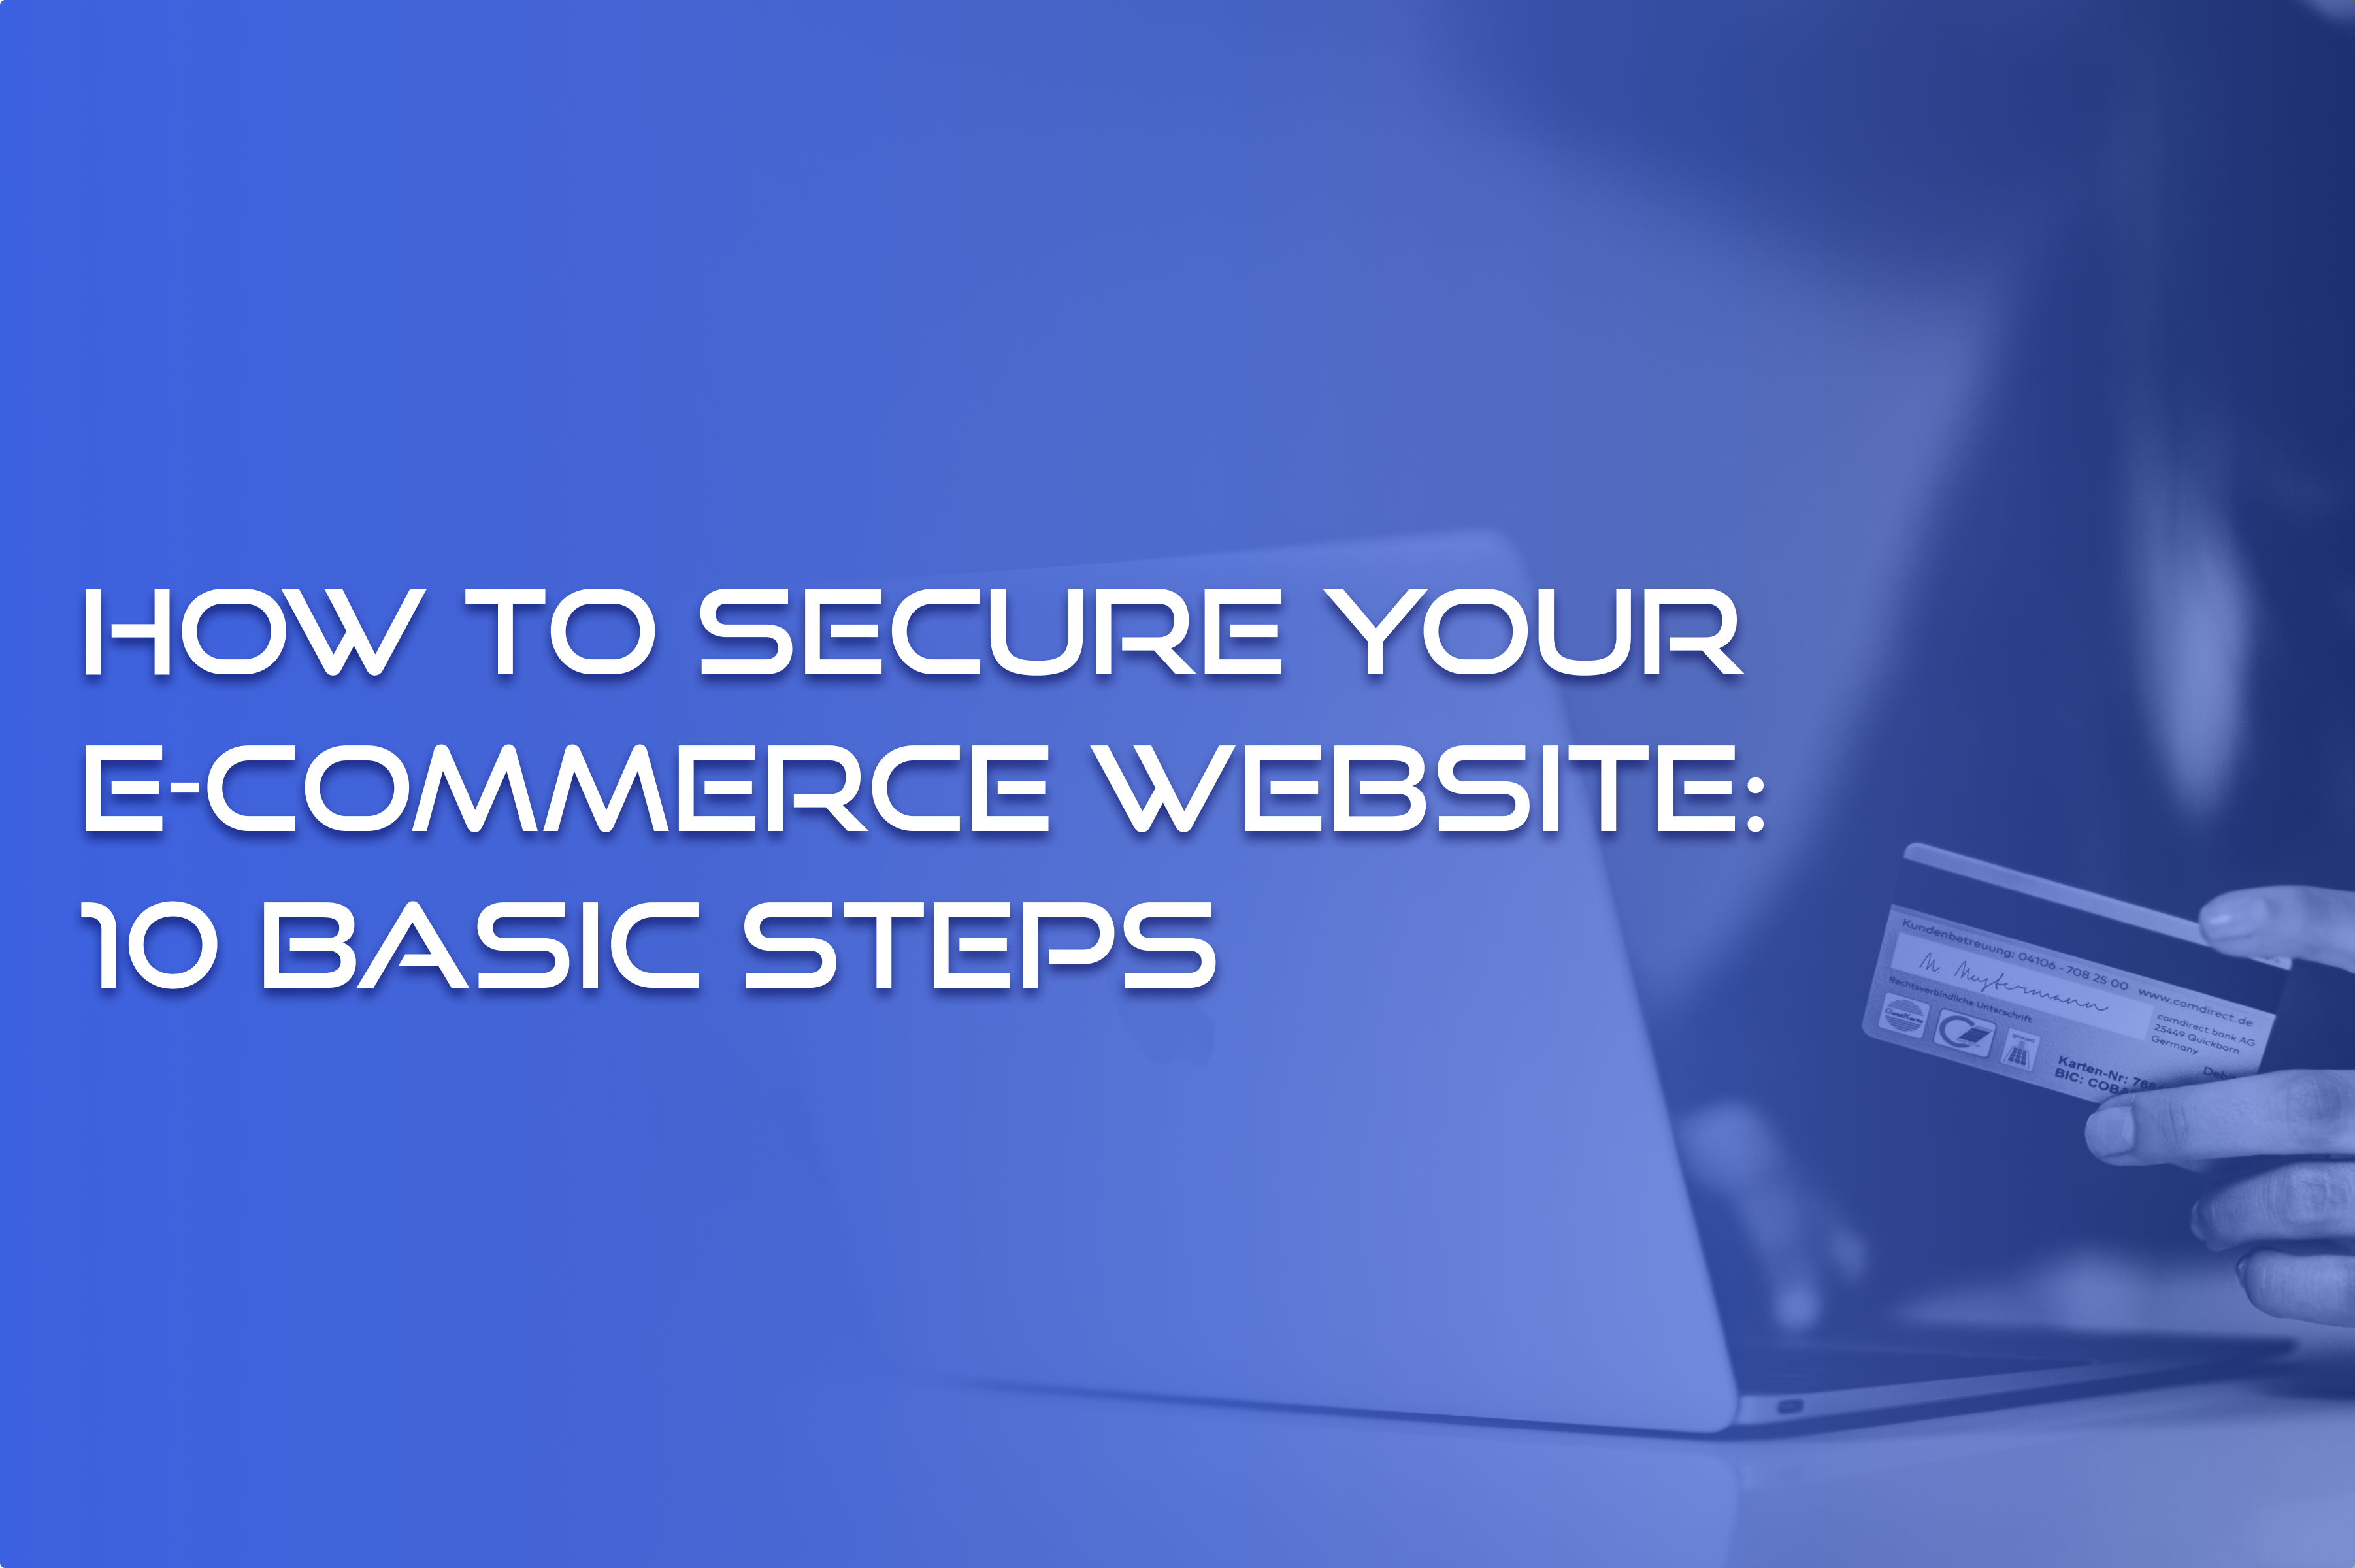 how to secure ecommerce website